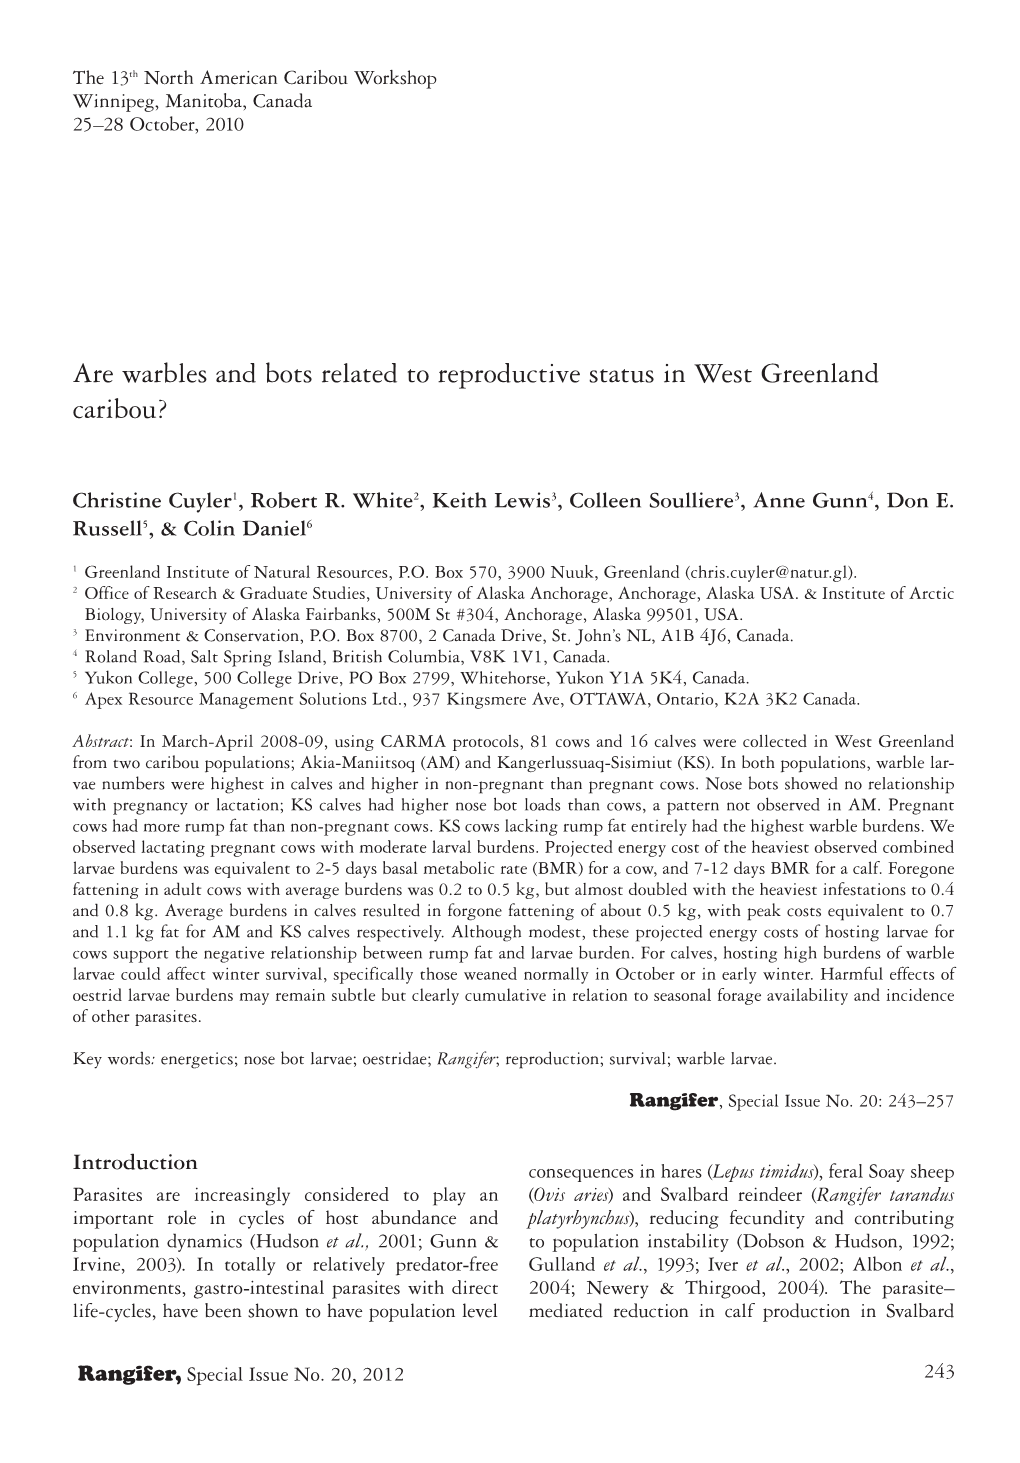 Are Warbles and Bots Related to Reproductive Status in West Greenland Caribou?